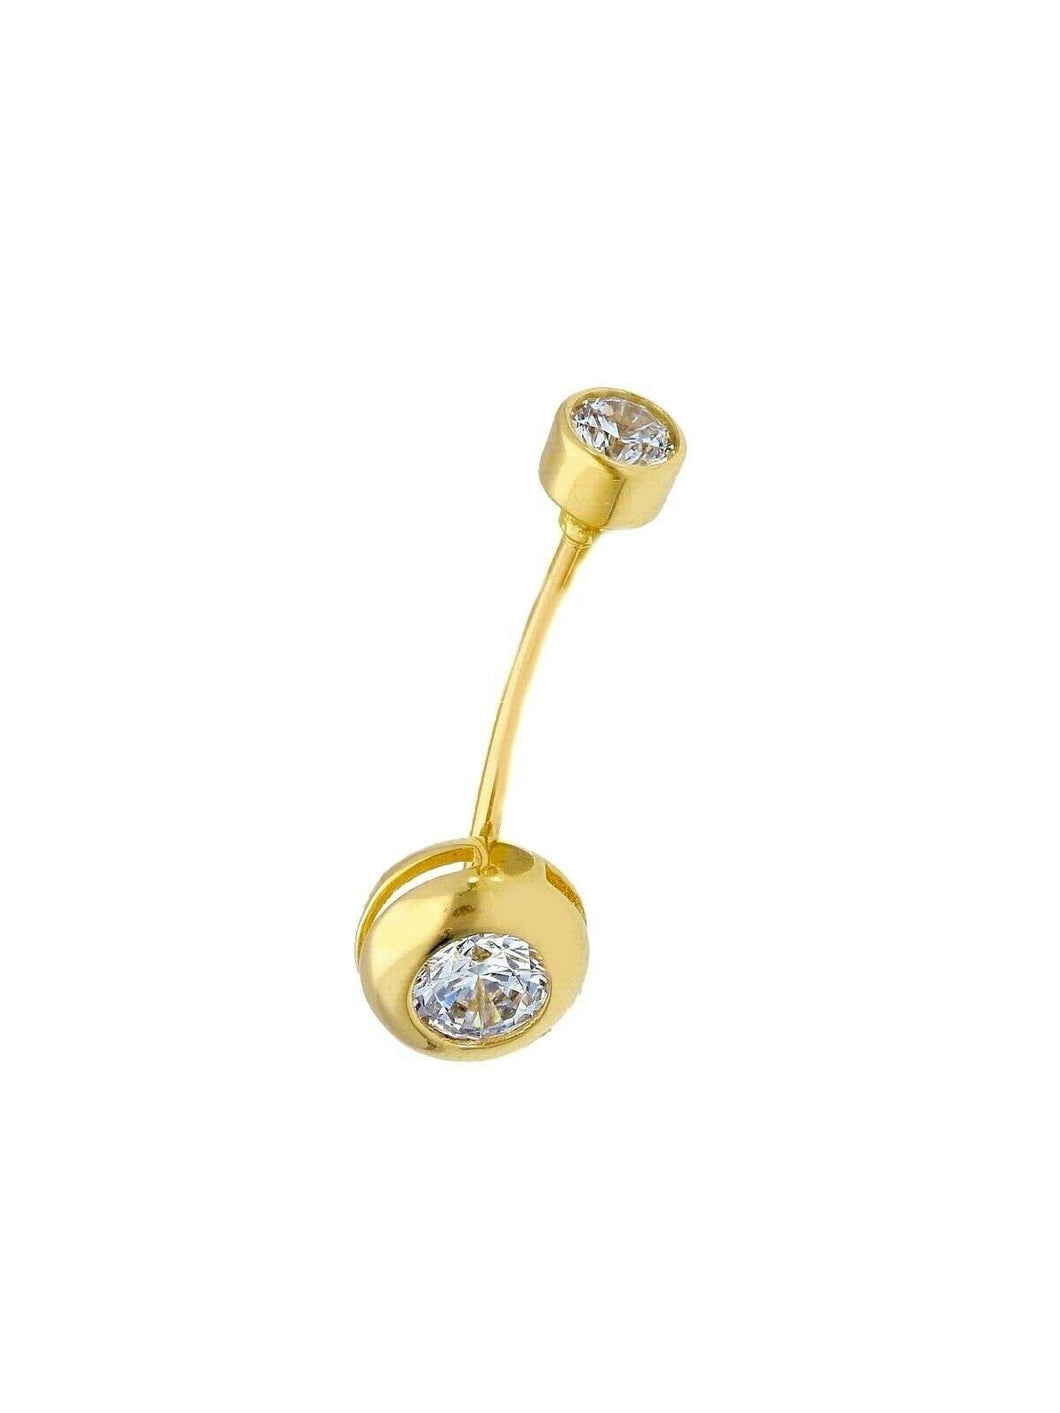 18K YELLOW GOLD PIERCING BARBELL CURVE BANANA BELLY BODY WITH 4-6mm ZIRCONIA